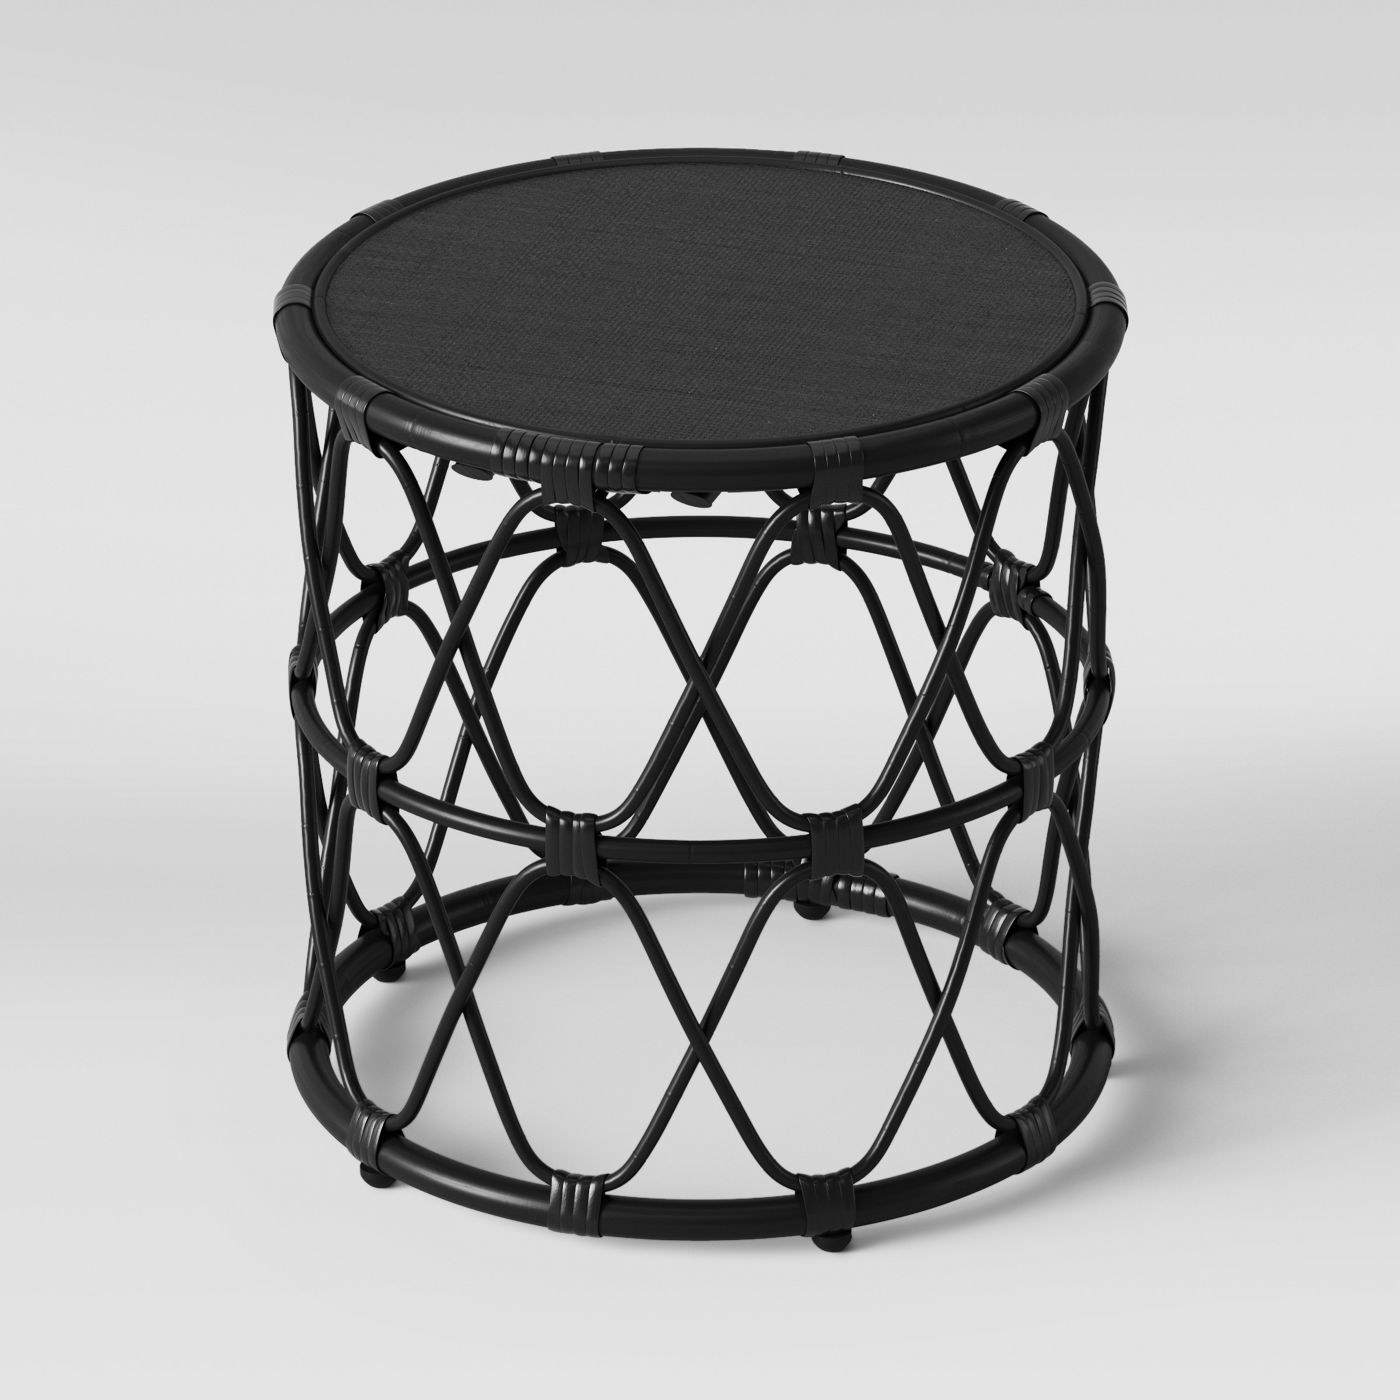 The woven rattan side table